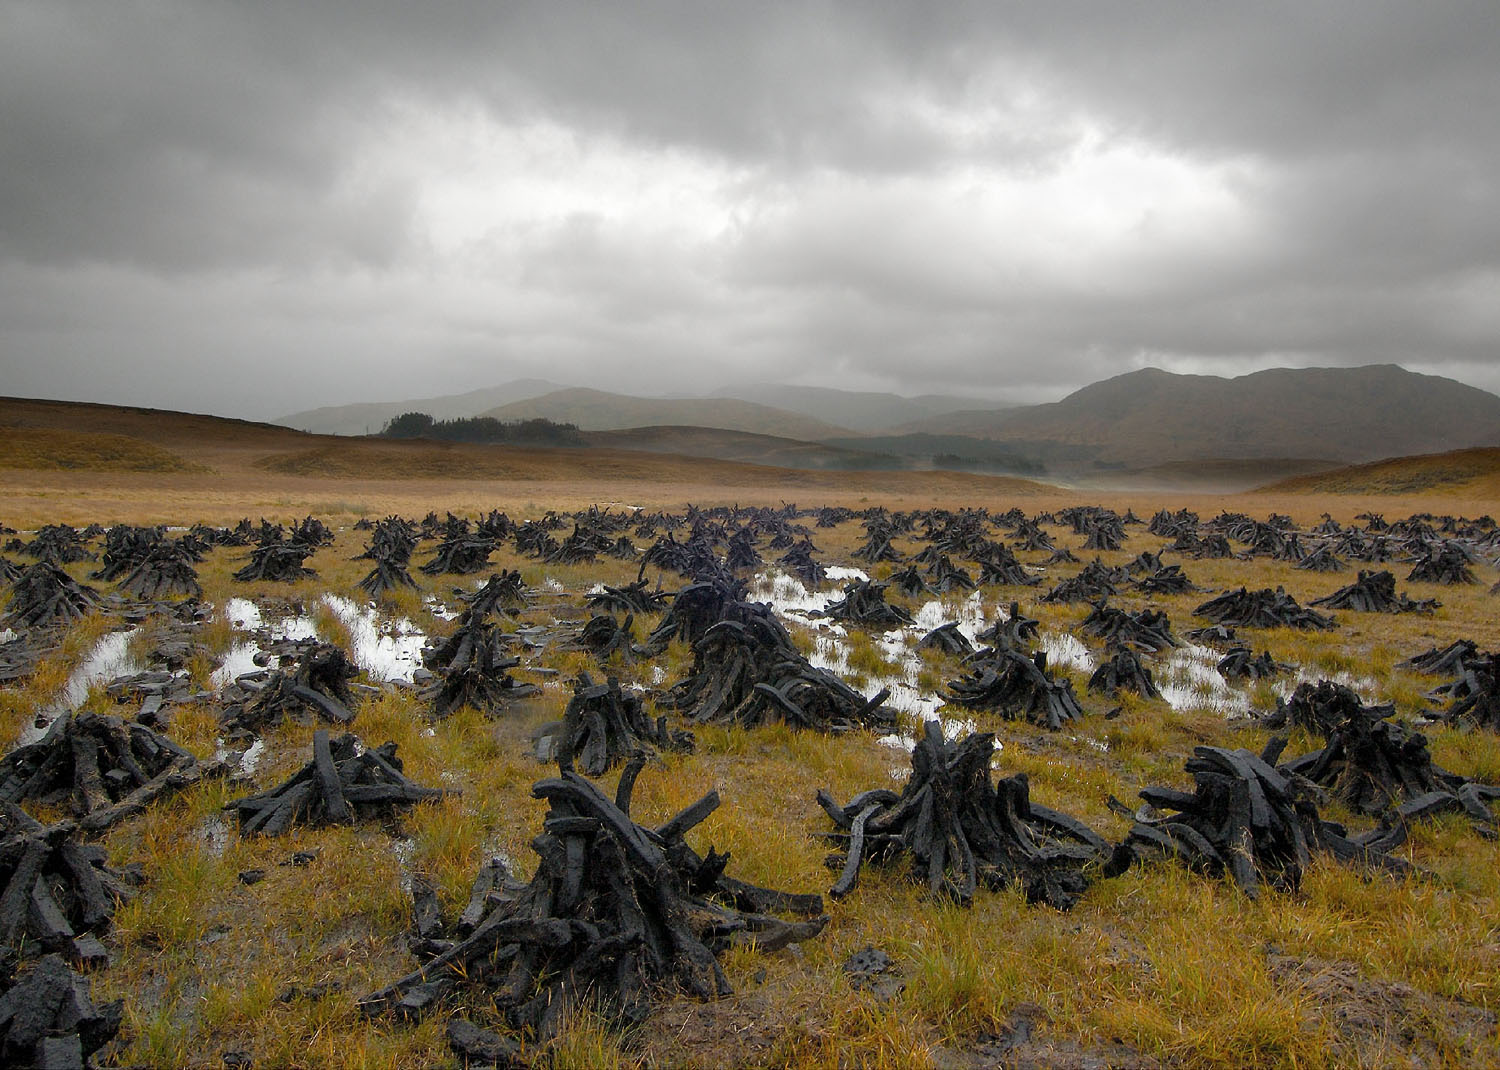 Barry Andersen, Peat, Storm, Connemara, Ireland, 2004. Digital Photograph, 10 x 12½ to 12 x 18 inches. Courtesy of the artist